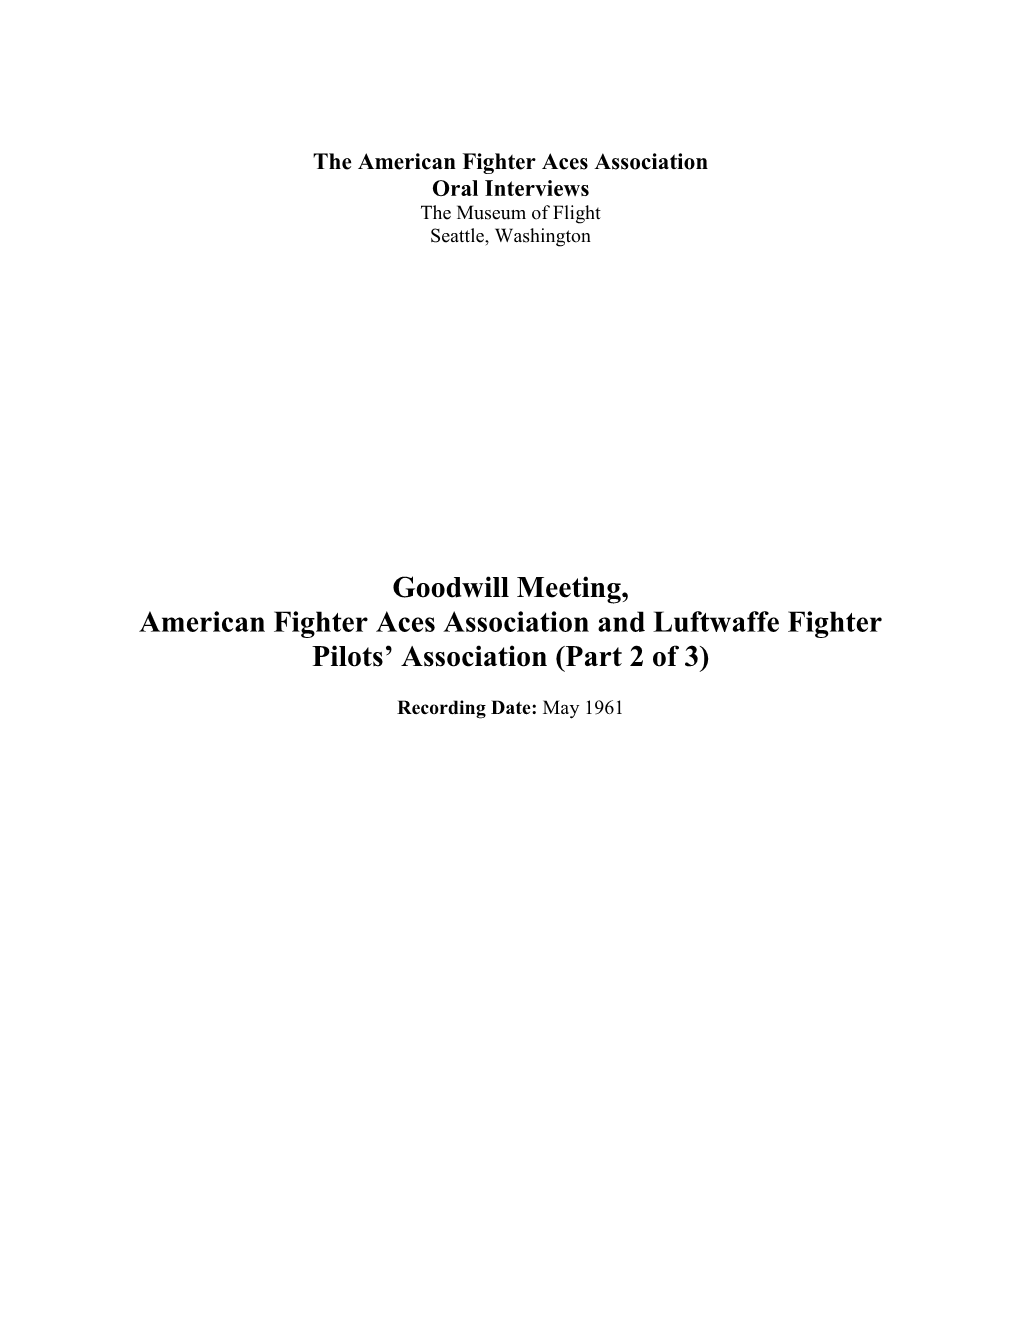 Goodwill Meeting, American Fighter Aces Association and Luftwaffe Fighter Pilots’ Association (Part 2 of 3)